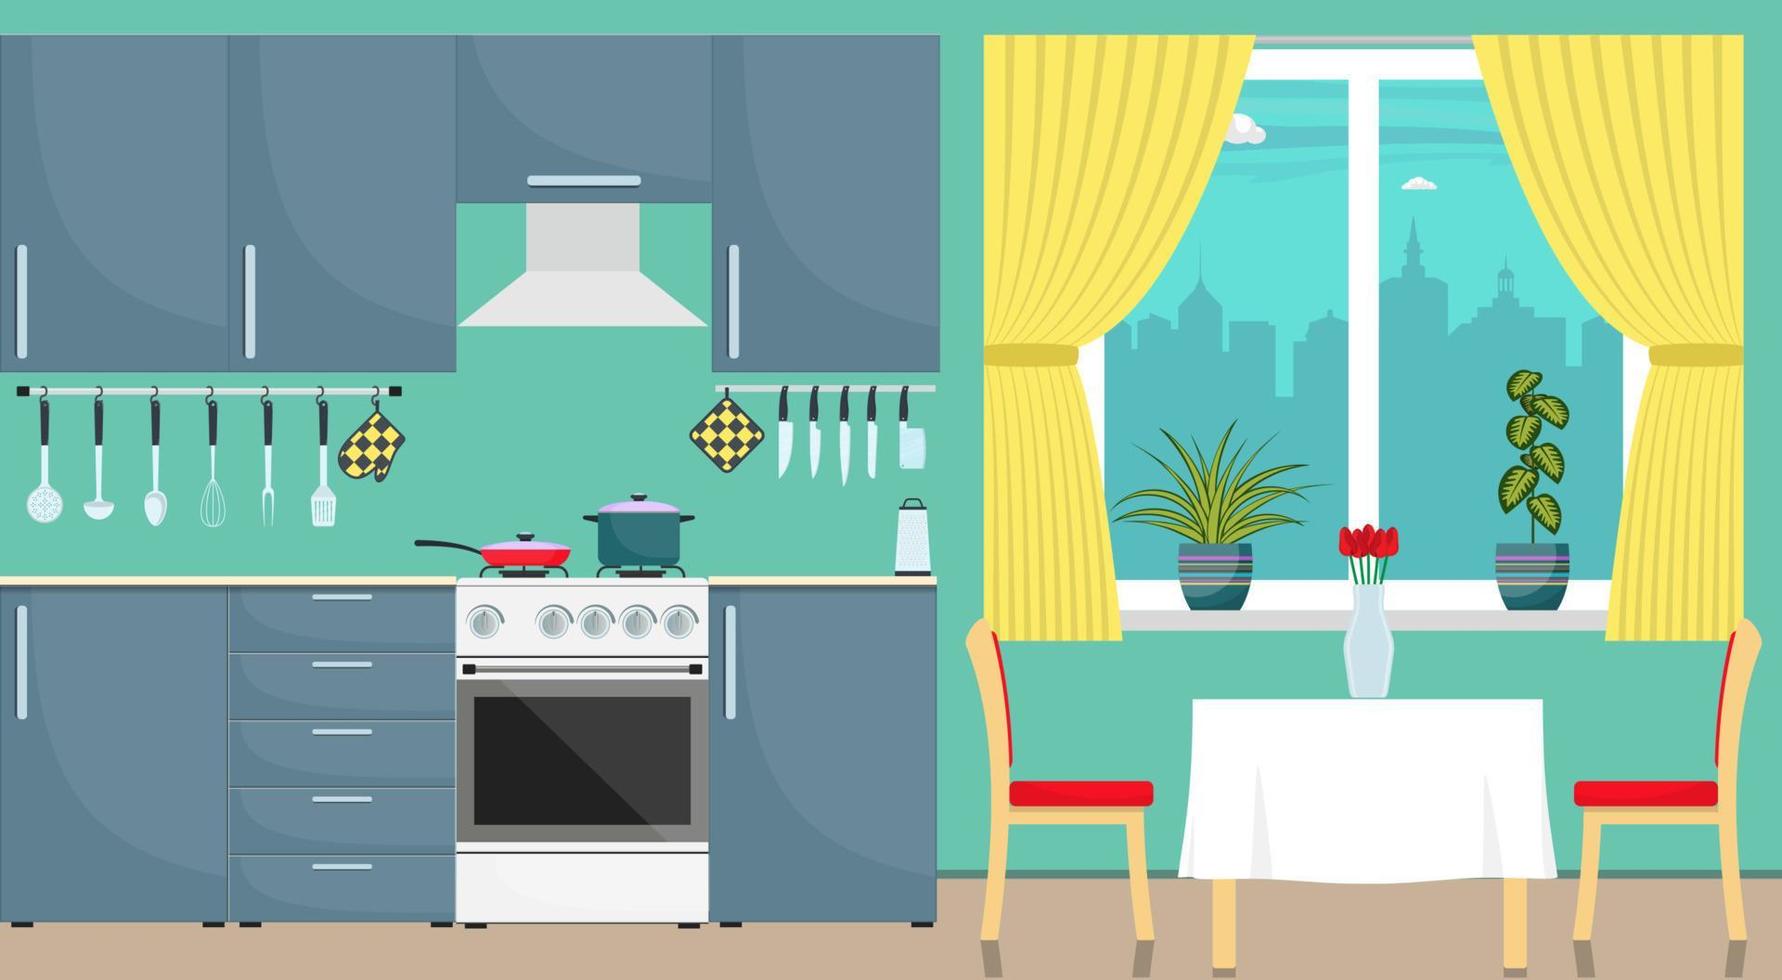 Modern stylish kitchen interior. Kitchen utensils and appliances, furniture, gas stove, refrigerator. Pan and frying pan on the stove. Vector illustration in flat style.